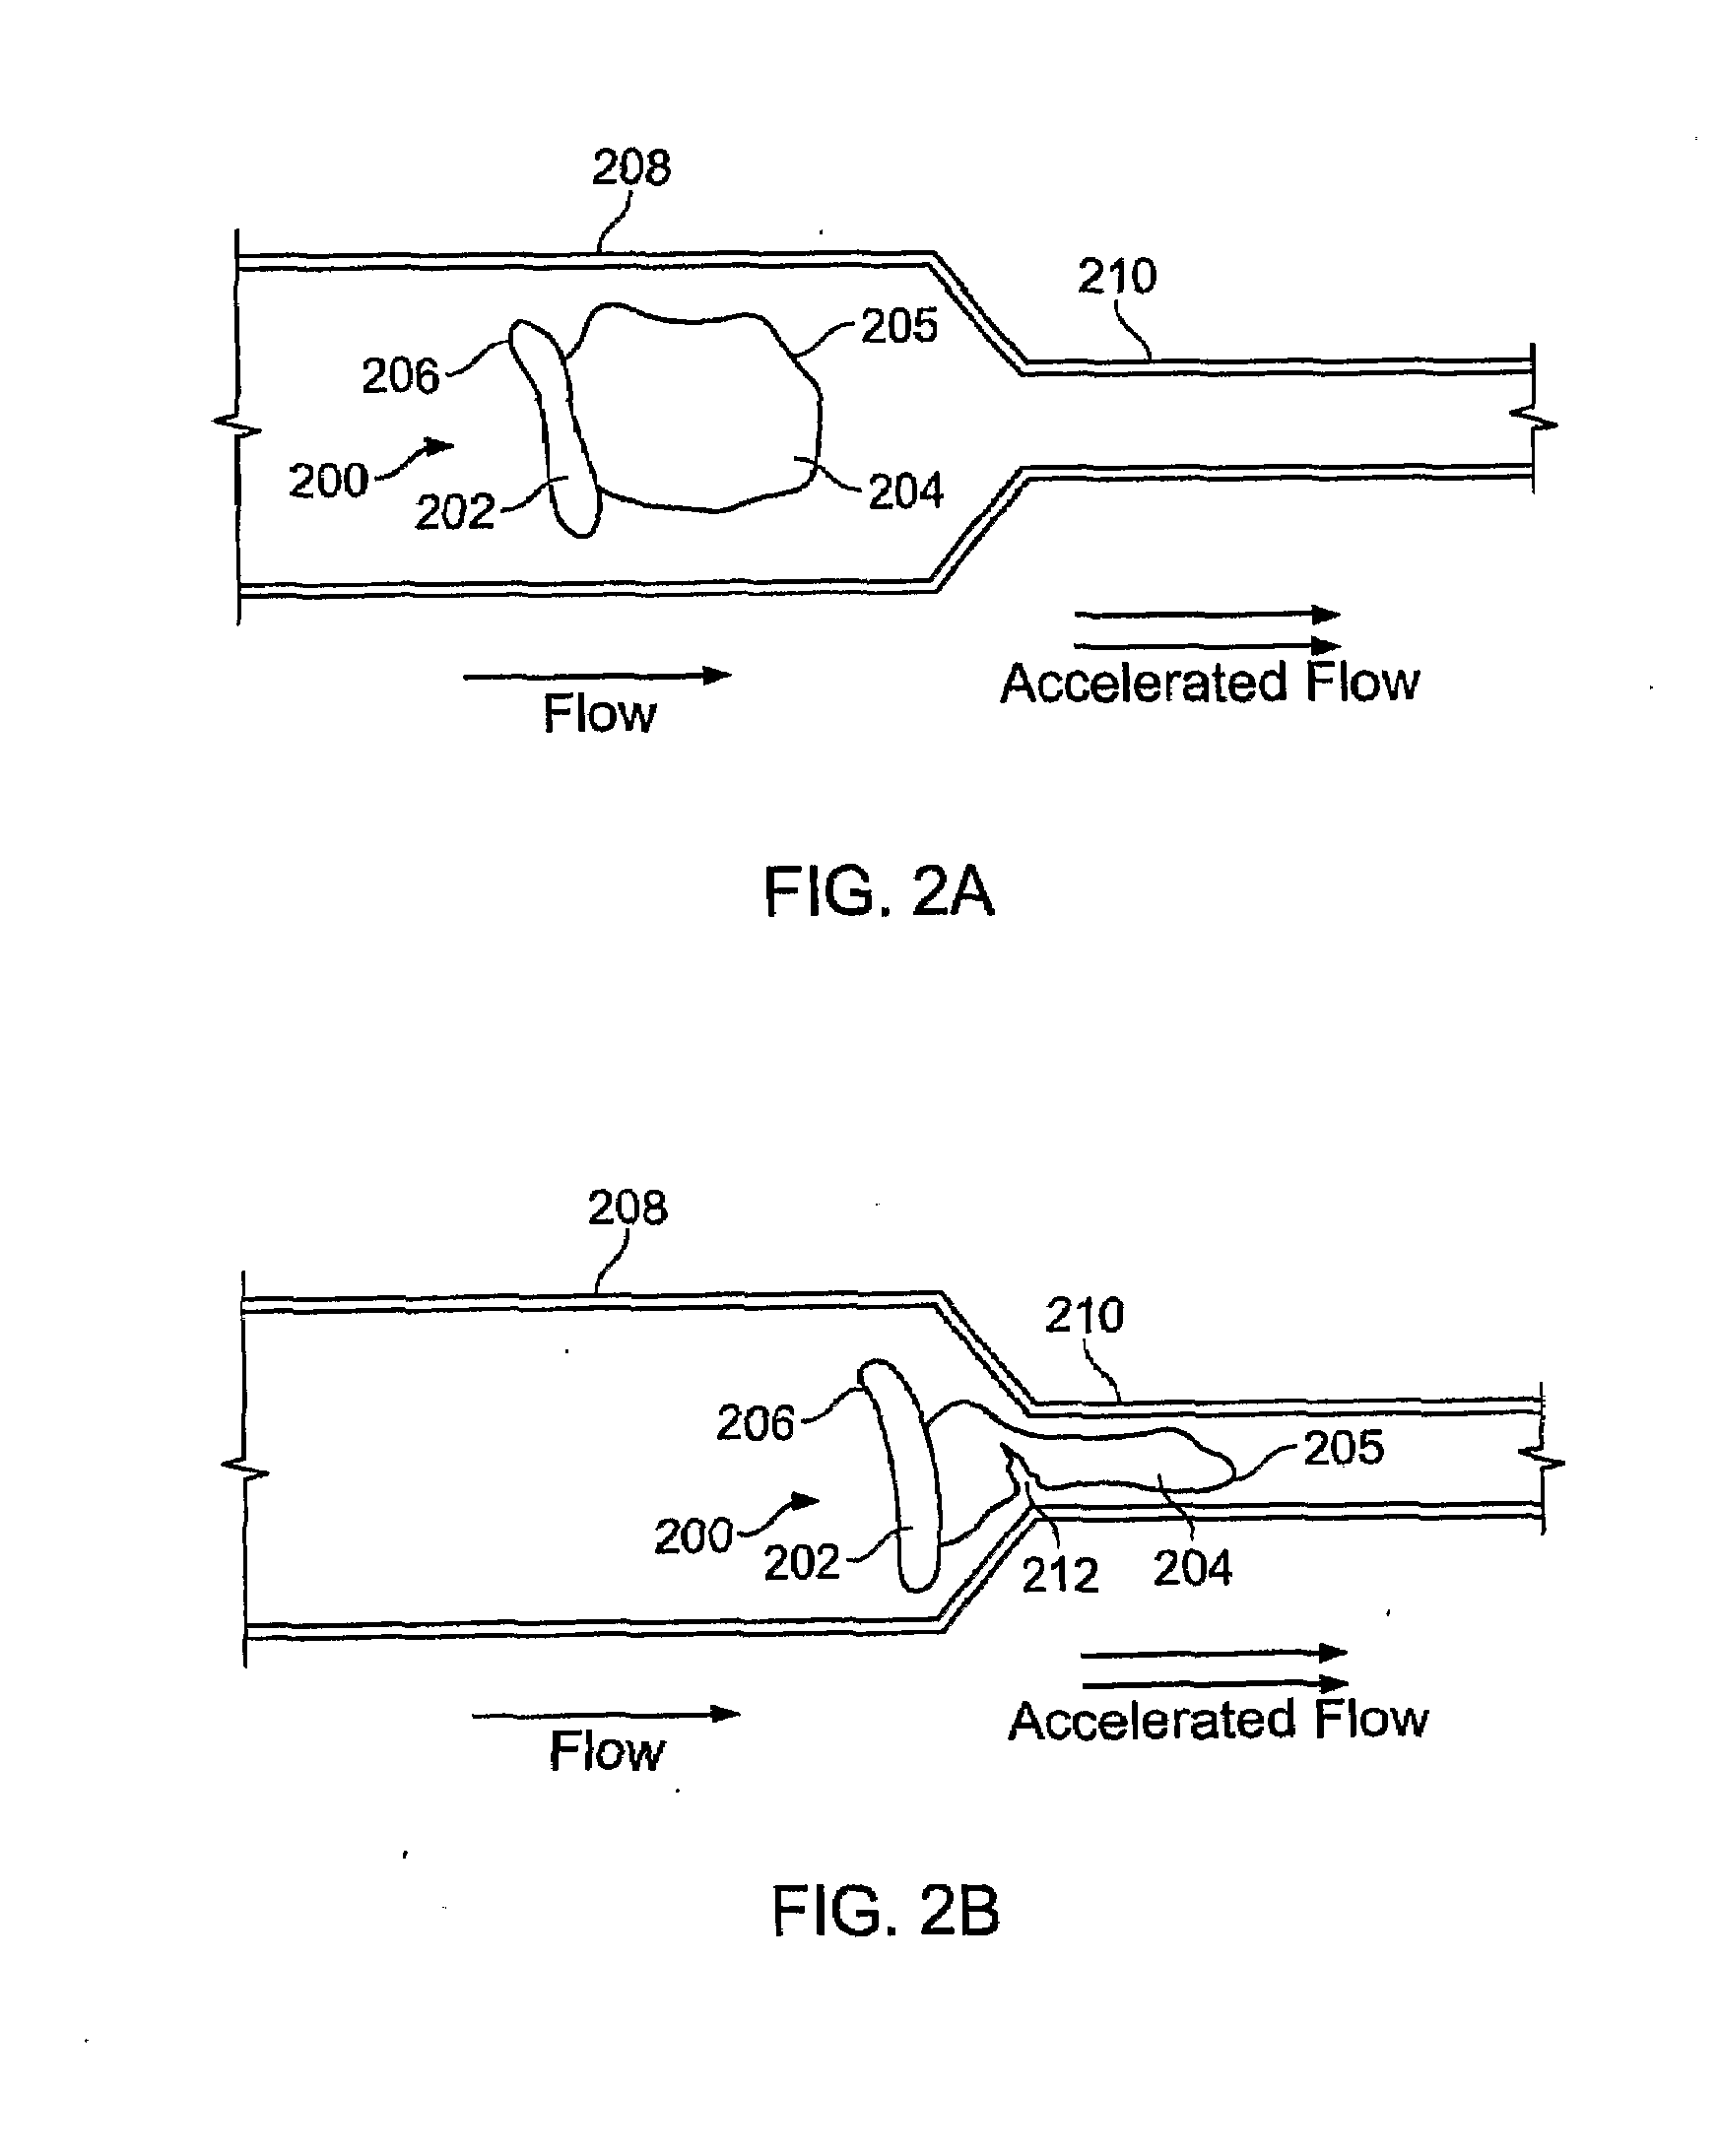 Systems and Methods For Separating Proteins From Connective Tissue